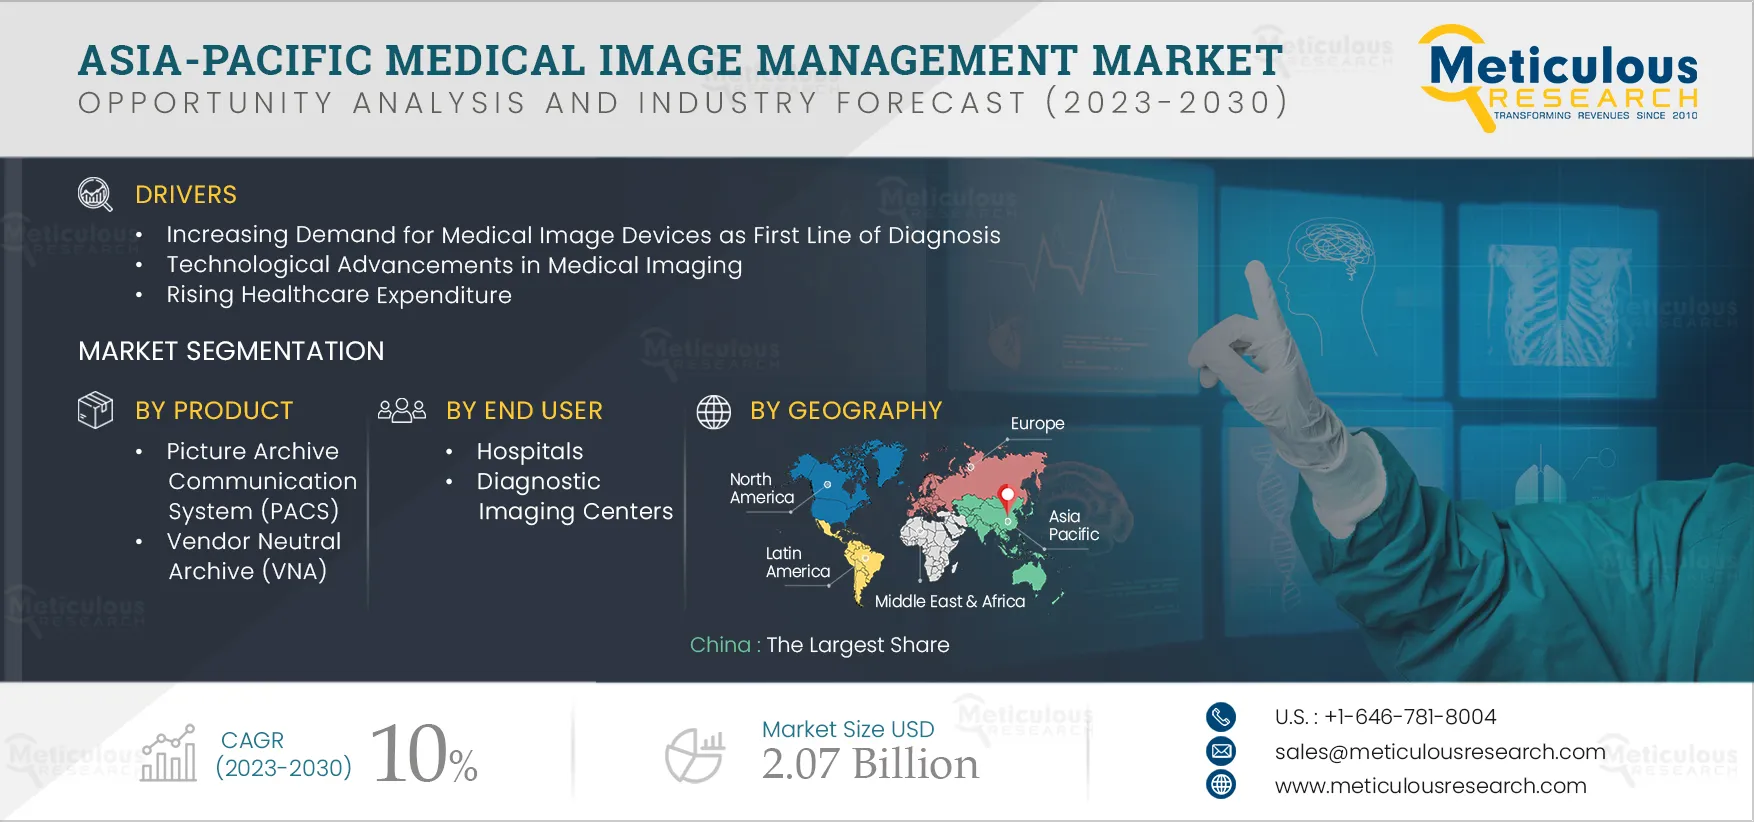 Asia-Pacific Medical Image Management Market